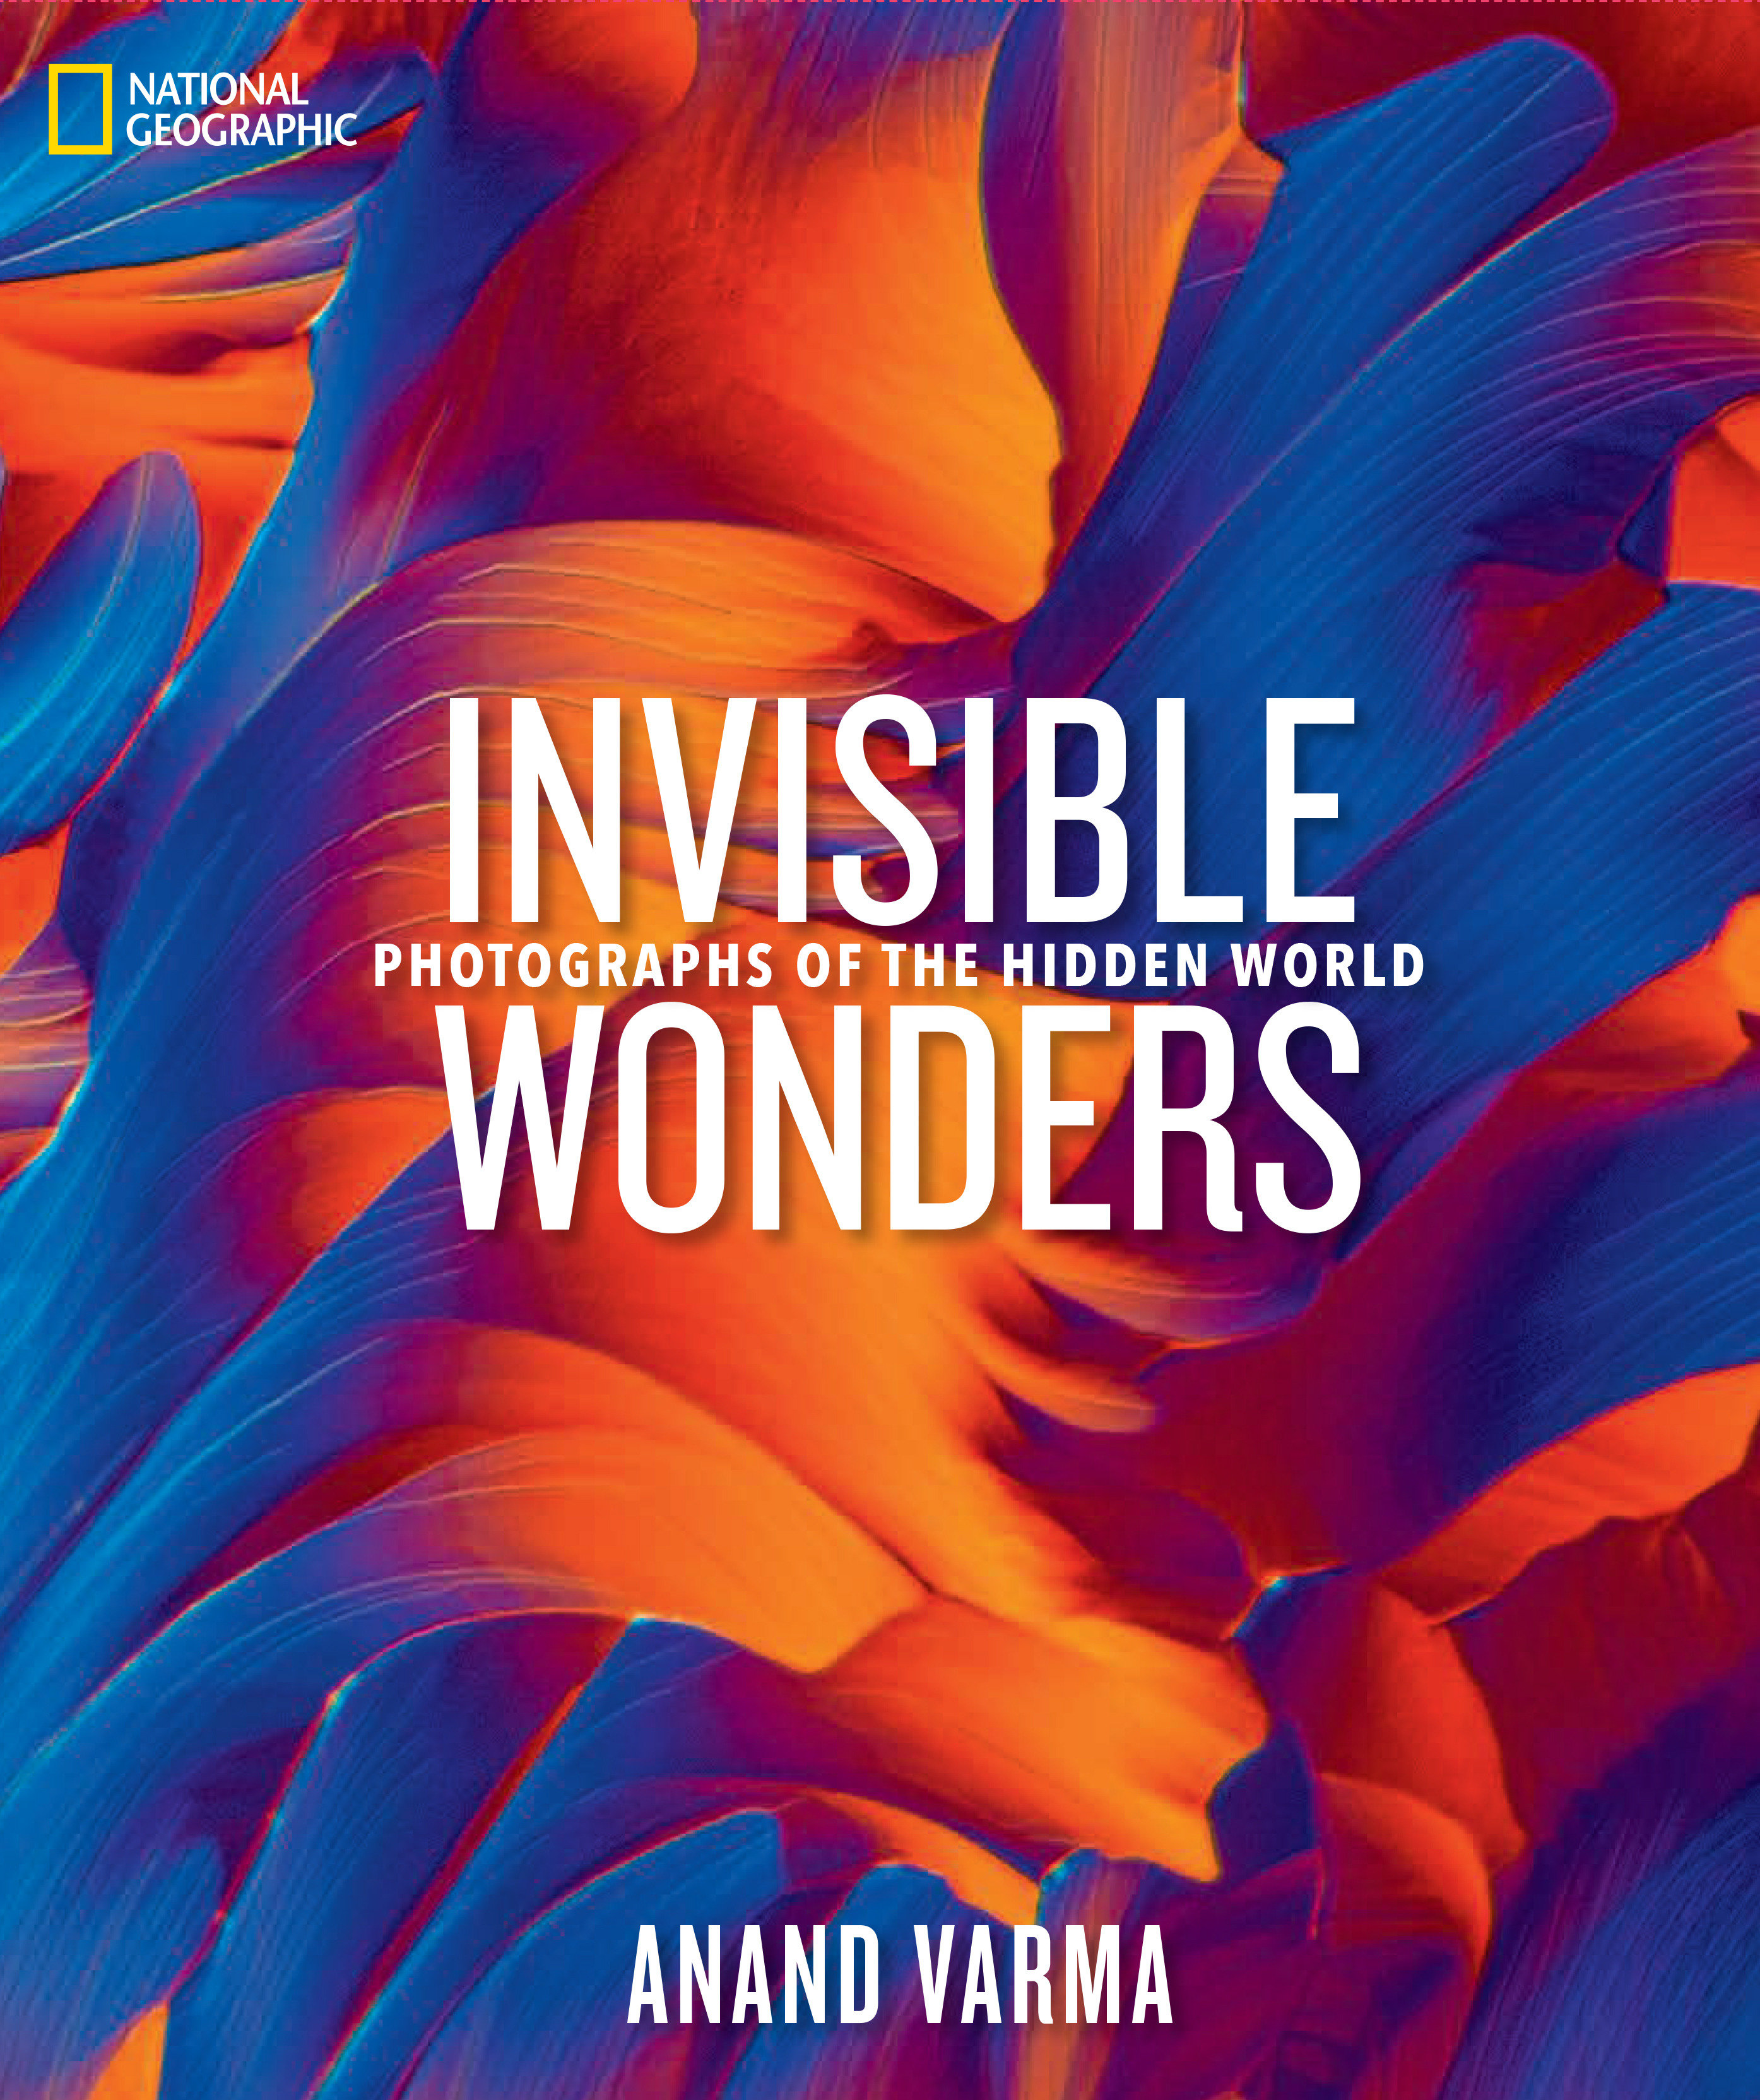 National Geographic Invisible Wonders (Hardcover Book)